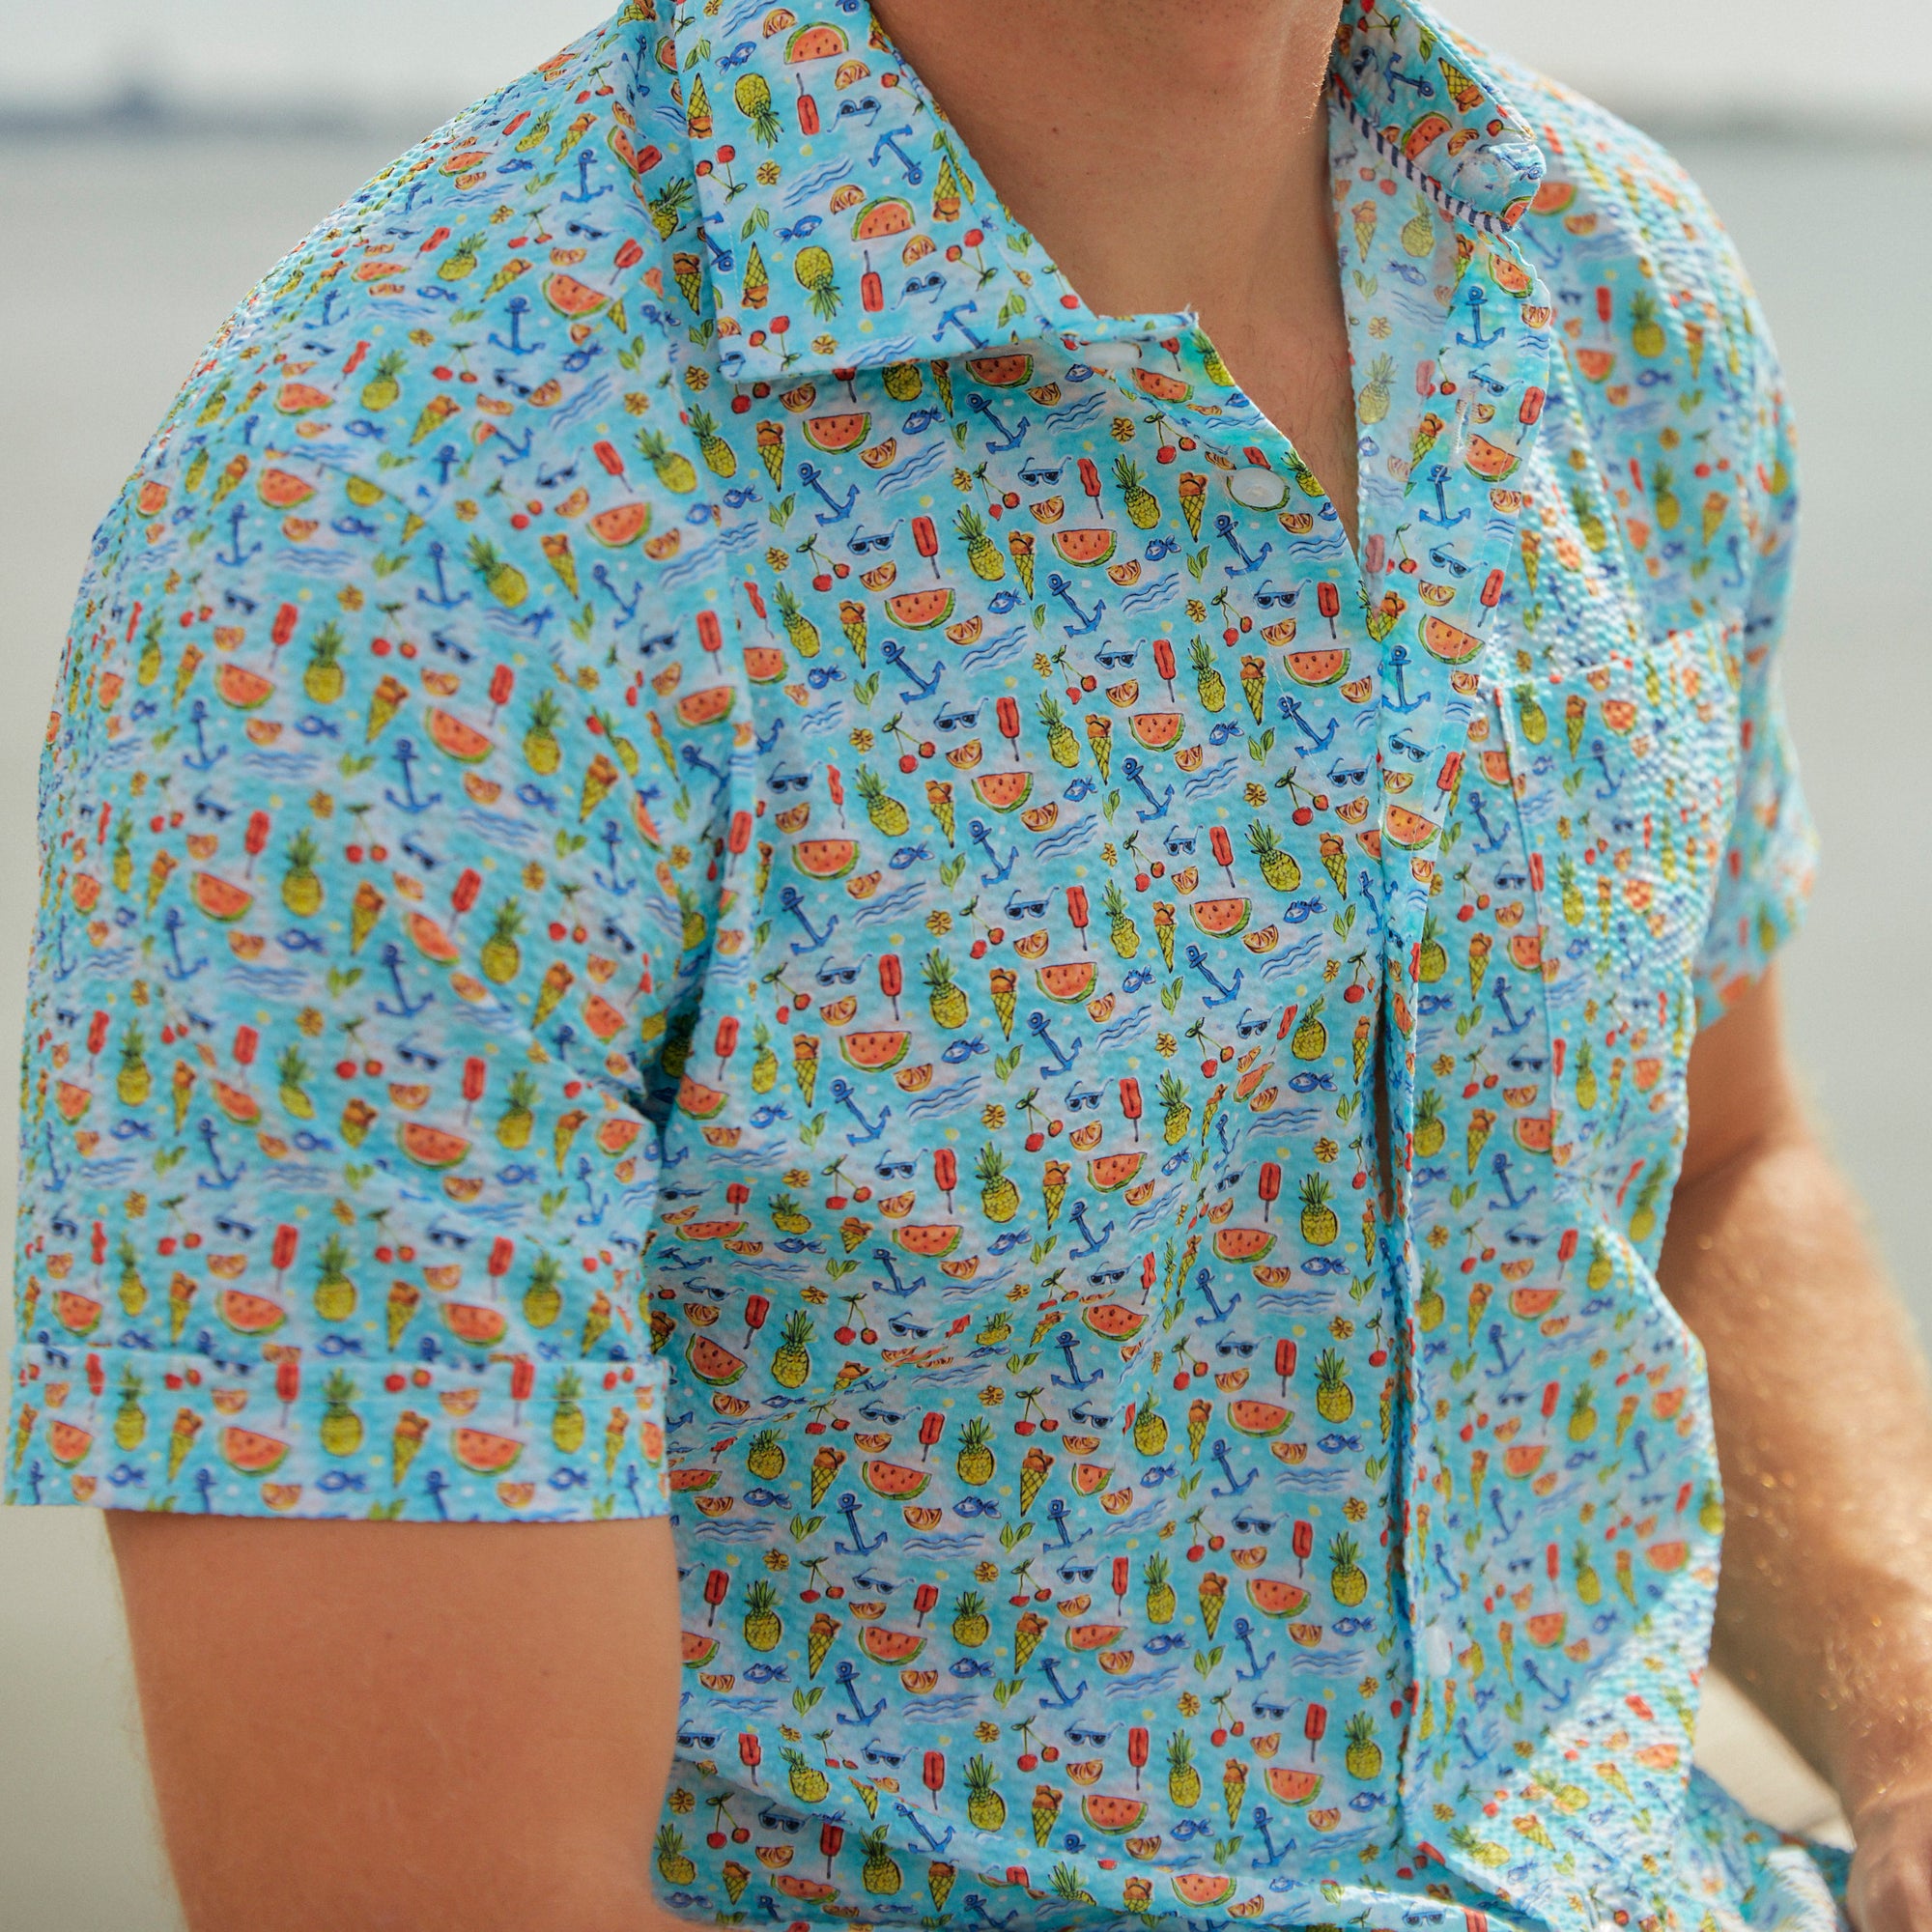 Fun in the sun or under the water. You're on summer break in this shirt and you're having a good time.   100% Cotton Seersucker • Spread Collar • Short Sleeve • Chest Pocket • Machine Washable • Made in Italy